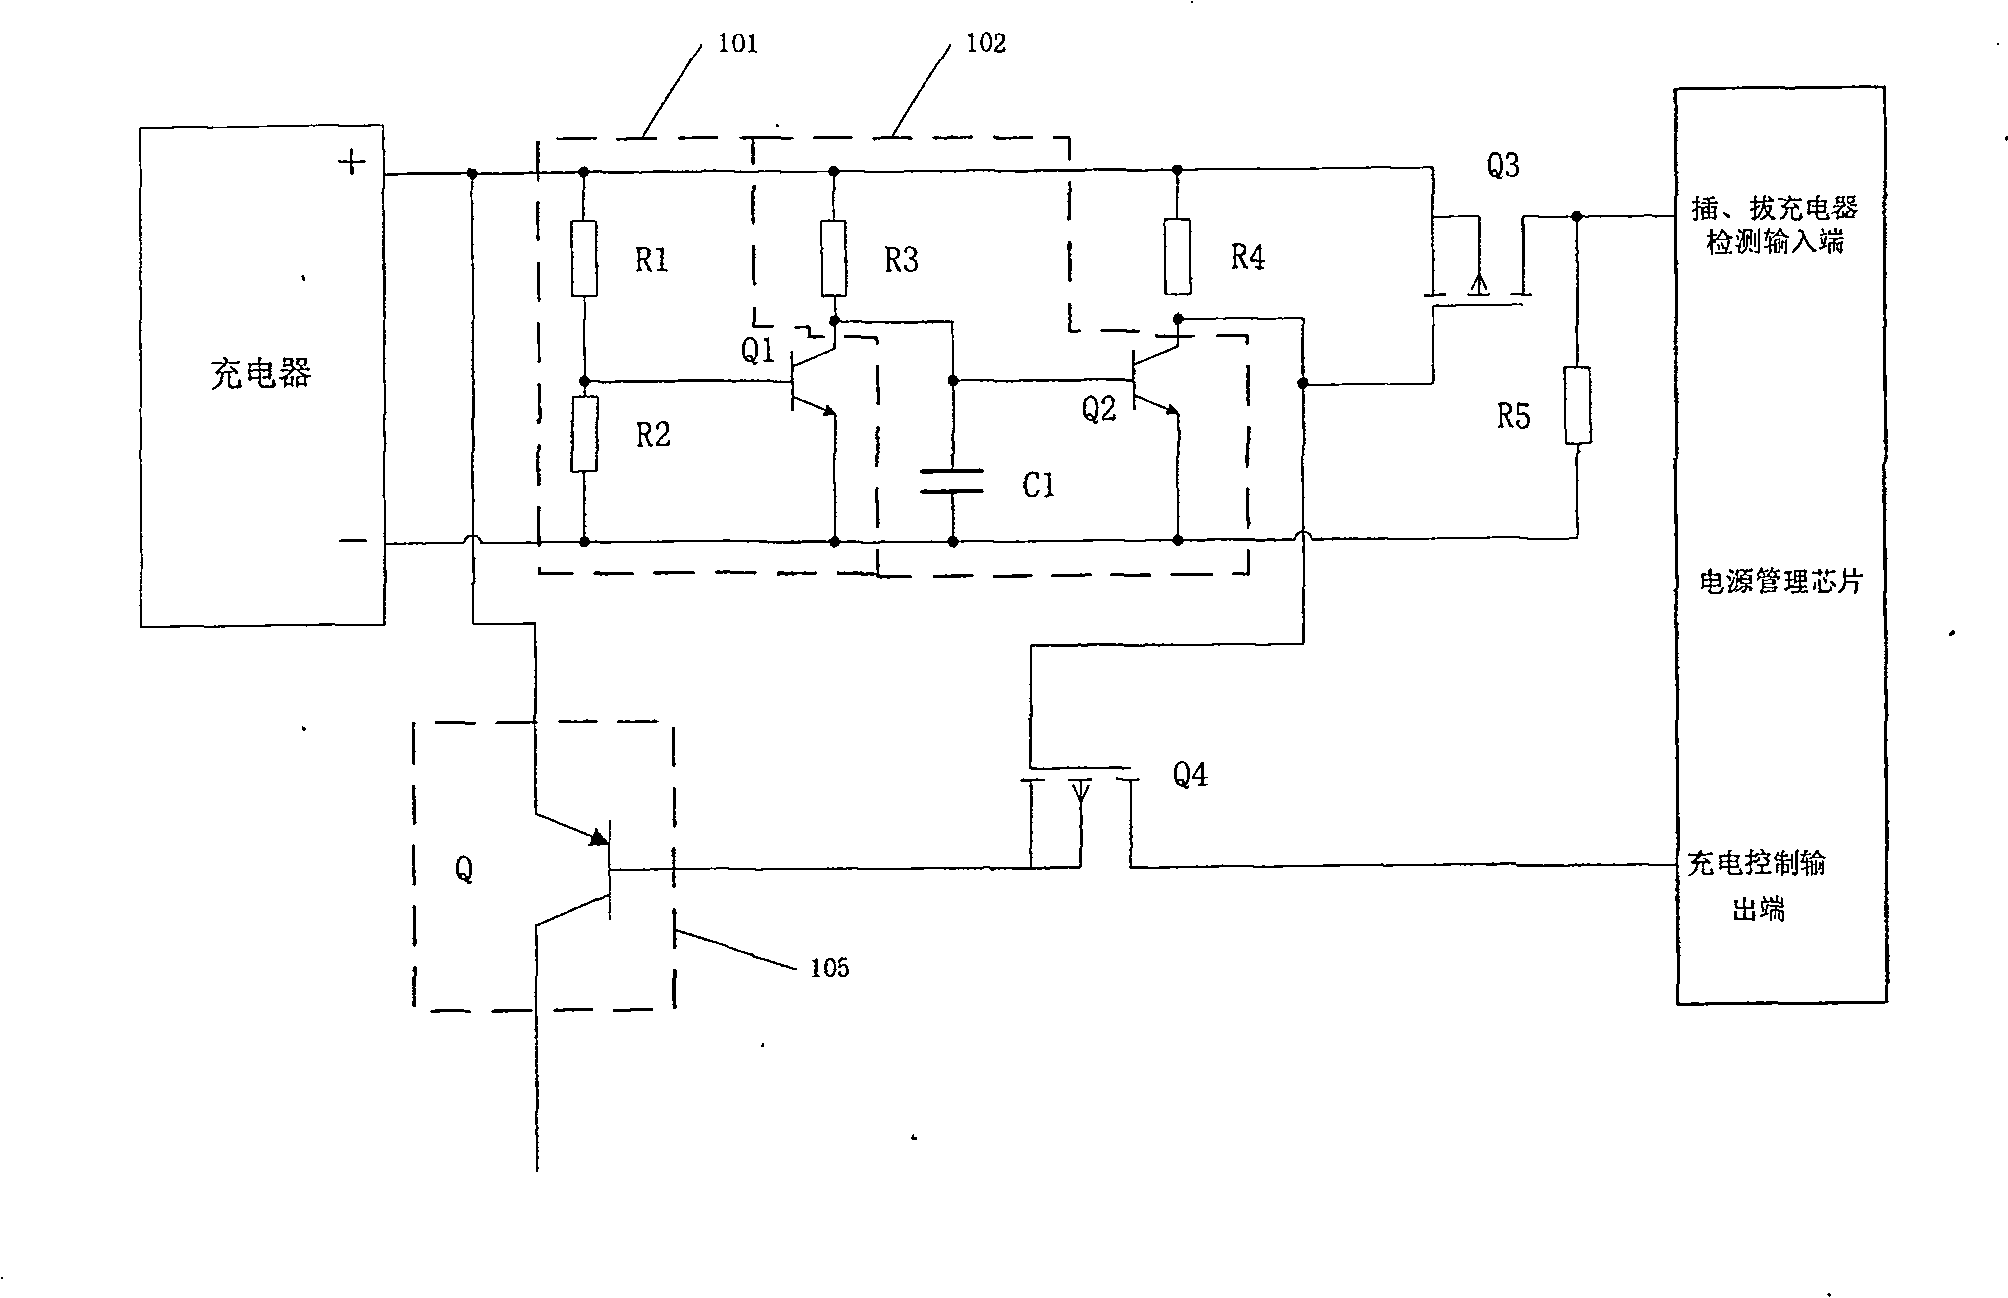 Terminal equipment charging overvoltage protective device and method